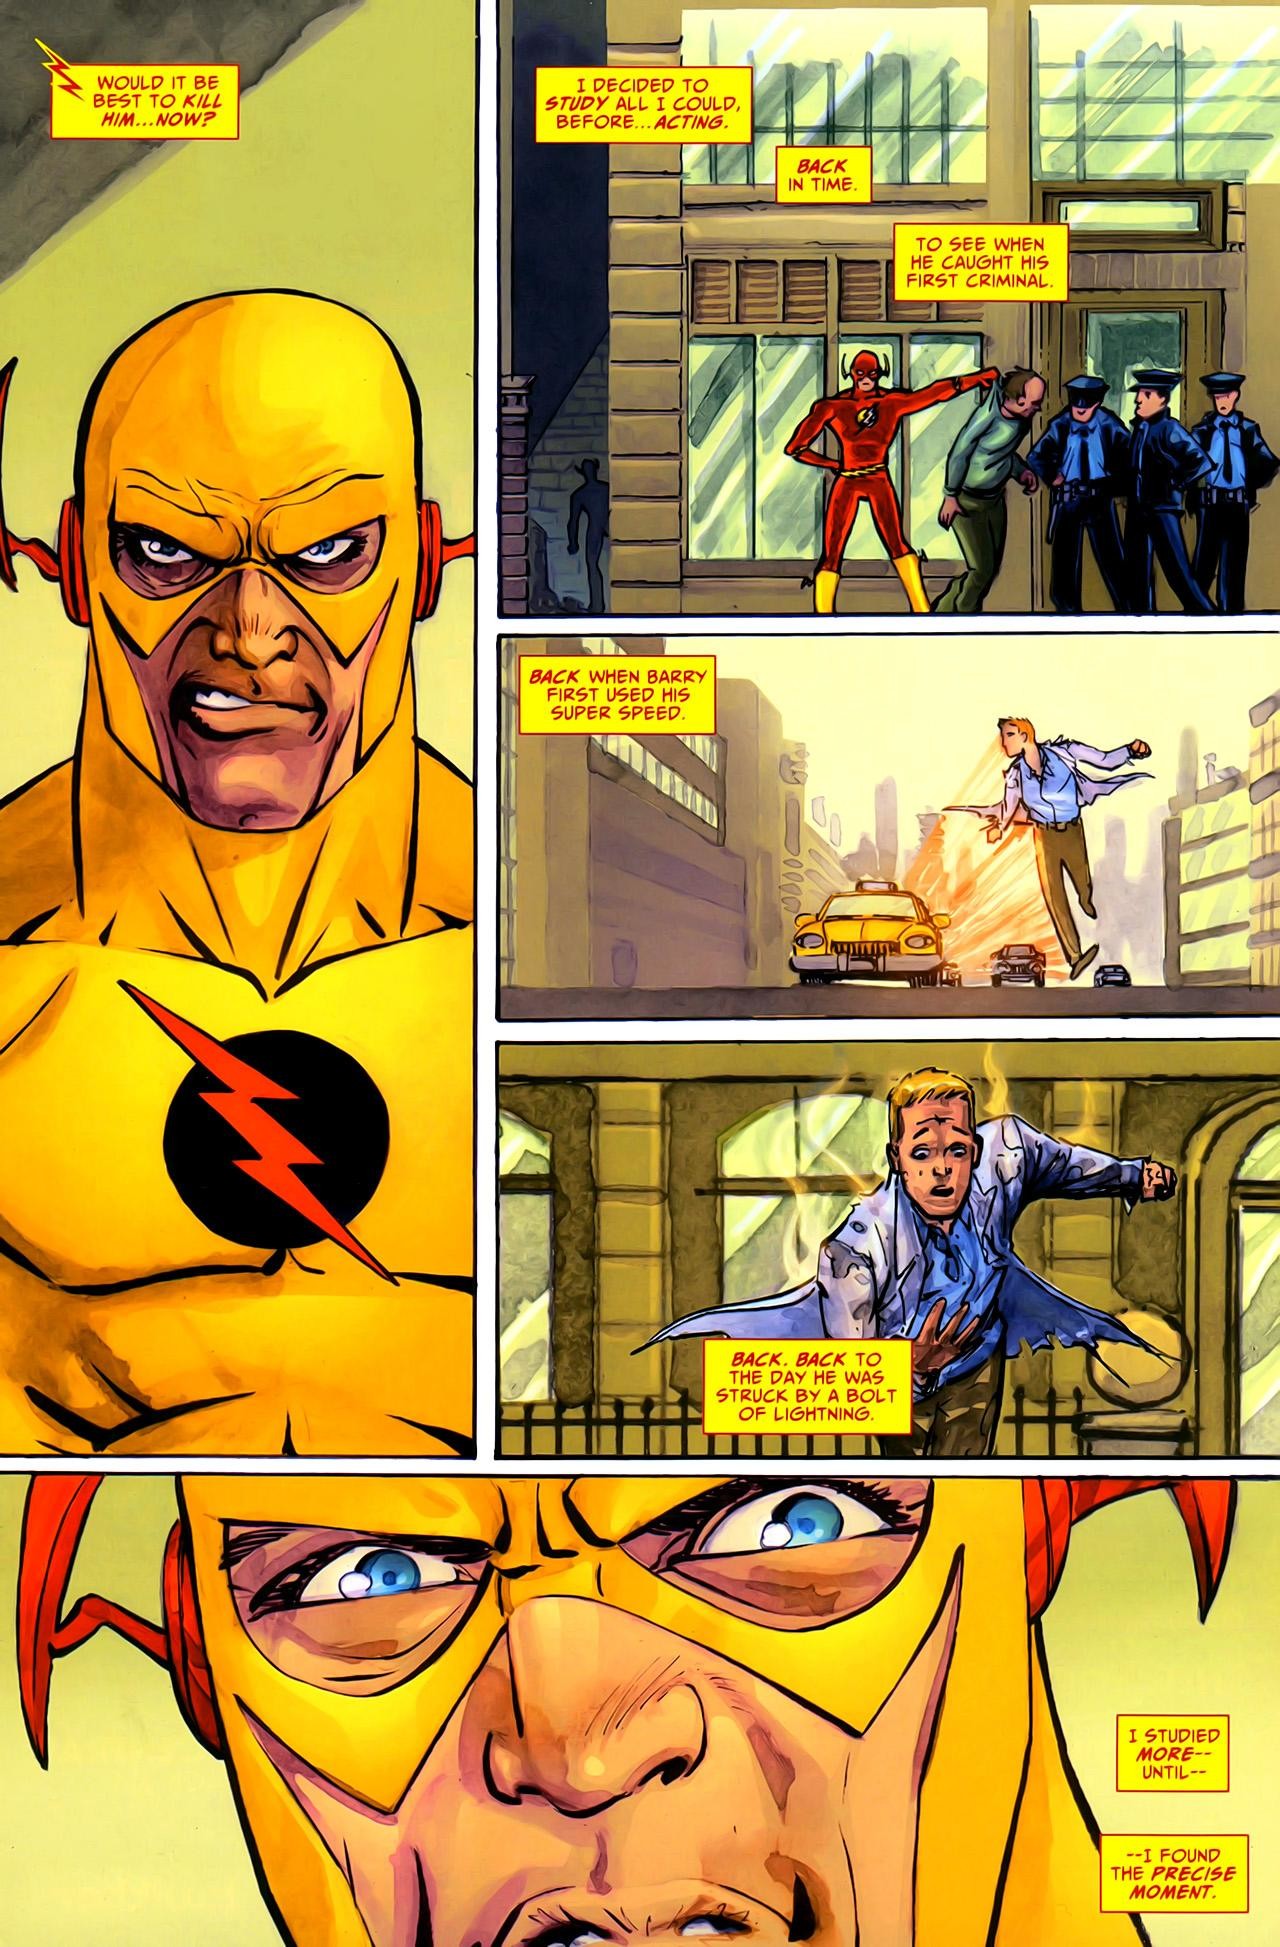 1280x1947 Tom Cavanaugh IS Harrison Wells/Eobard Thawne/Reverse-Flash [Archive] -  Page 4 - The SuperHeroHype Forums